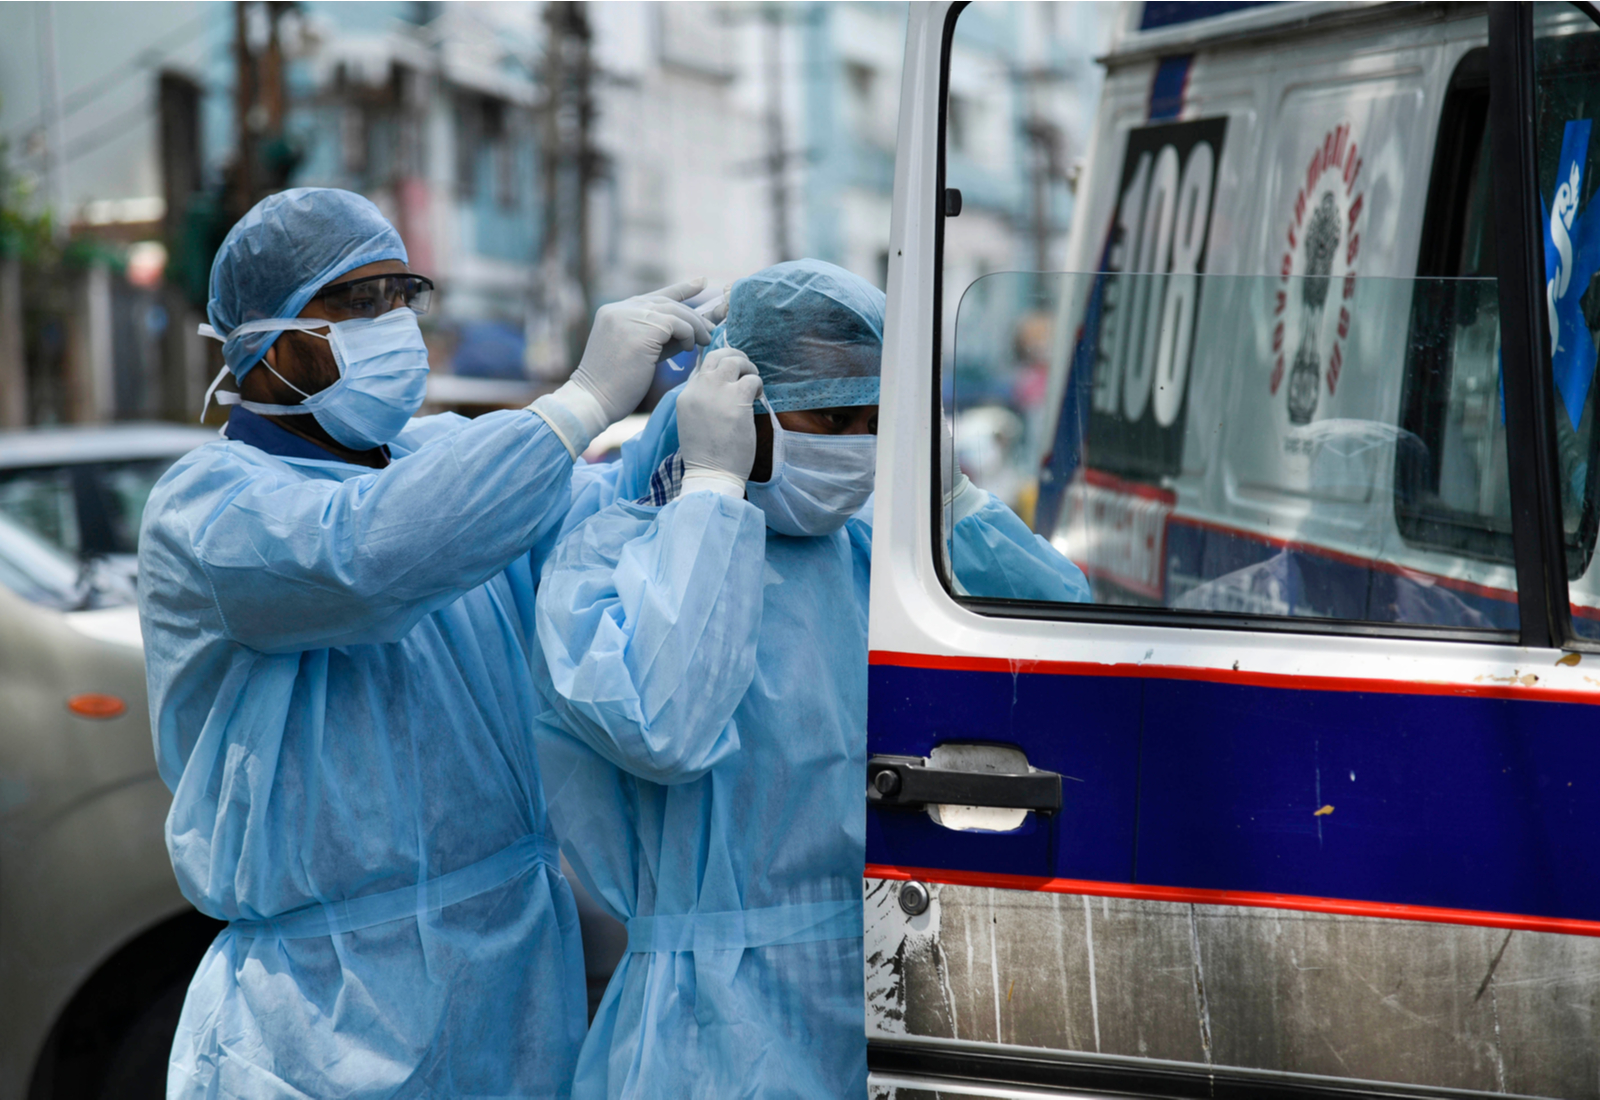 Health workers suit up before they transport people to hospital for testing in Guwahati in the northeastern Indian state of Assam. Photo by Talukdar David via Shutterstock.com 